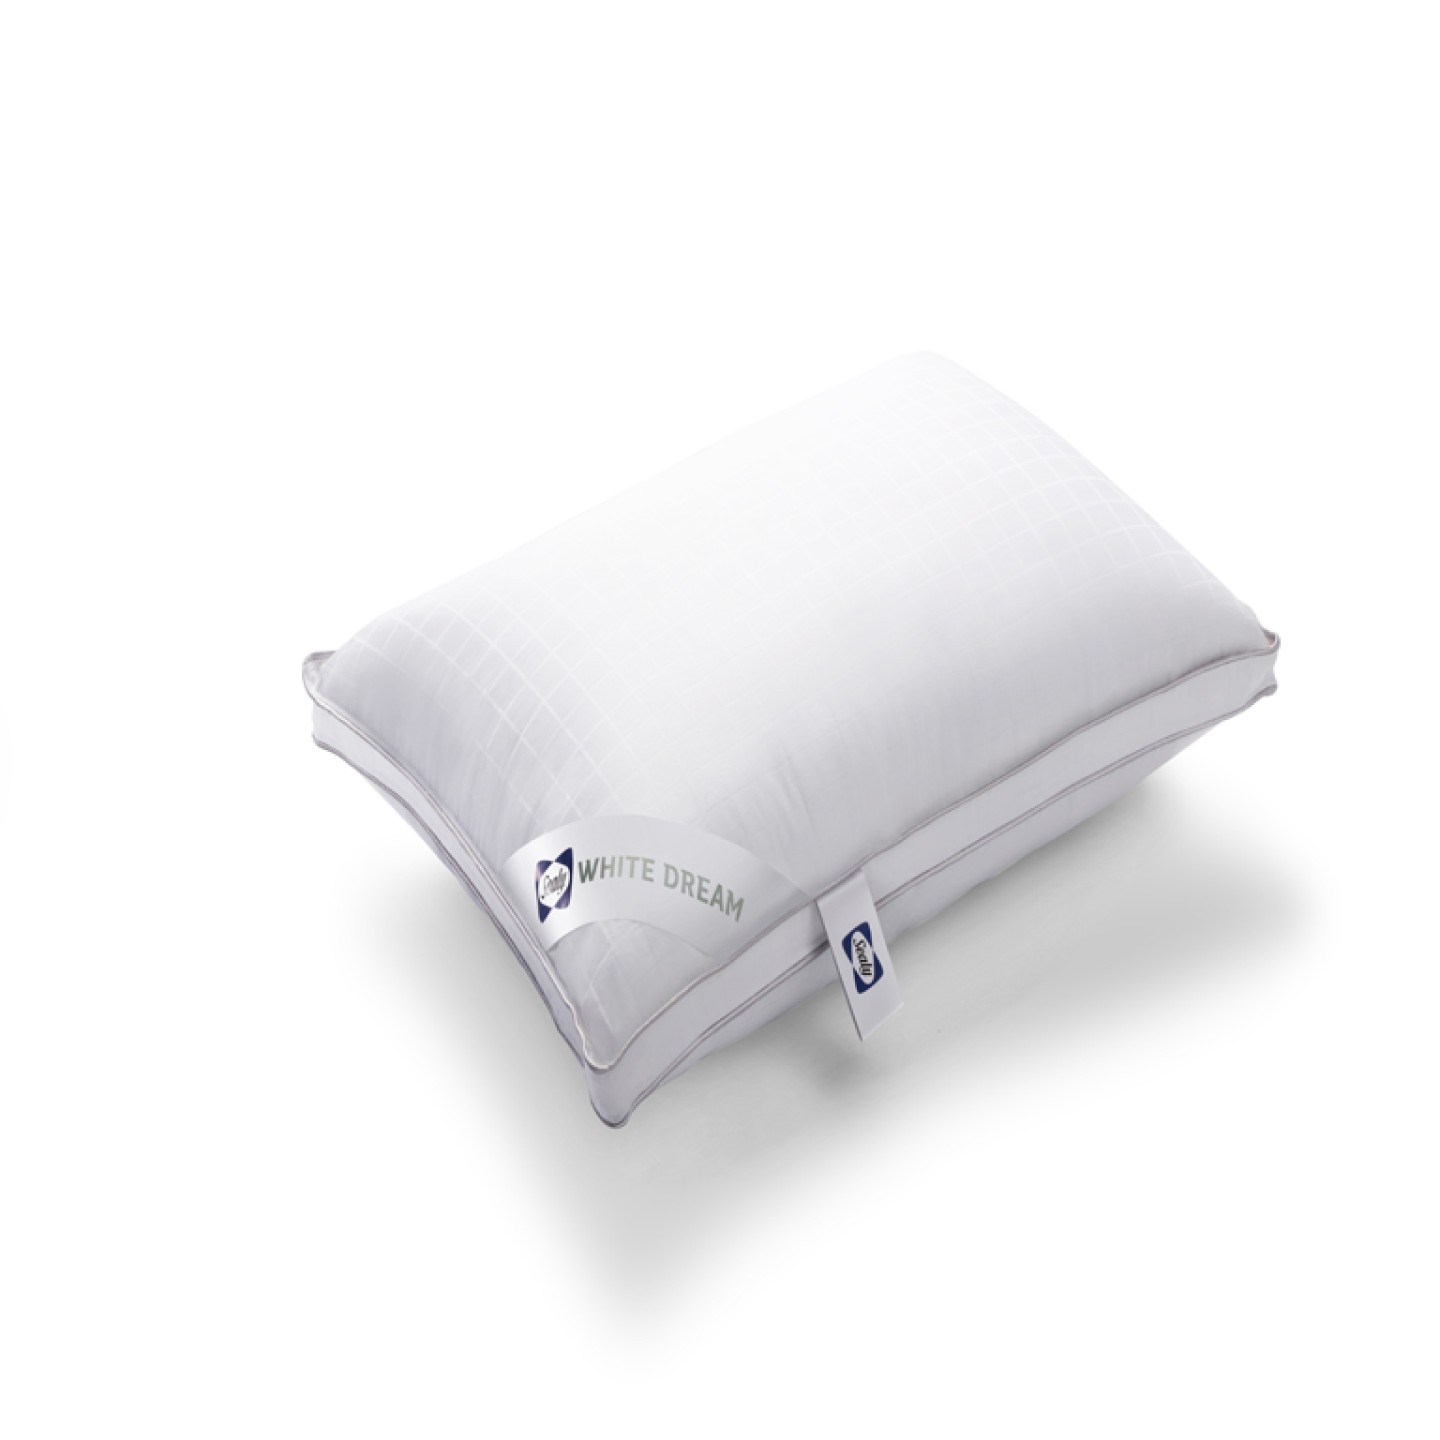 THE WHITE DREAM PILLOW by Sealy